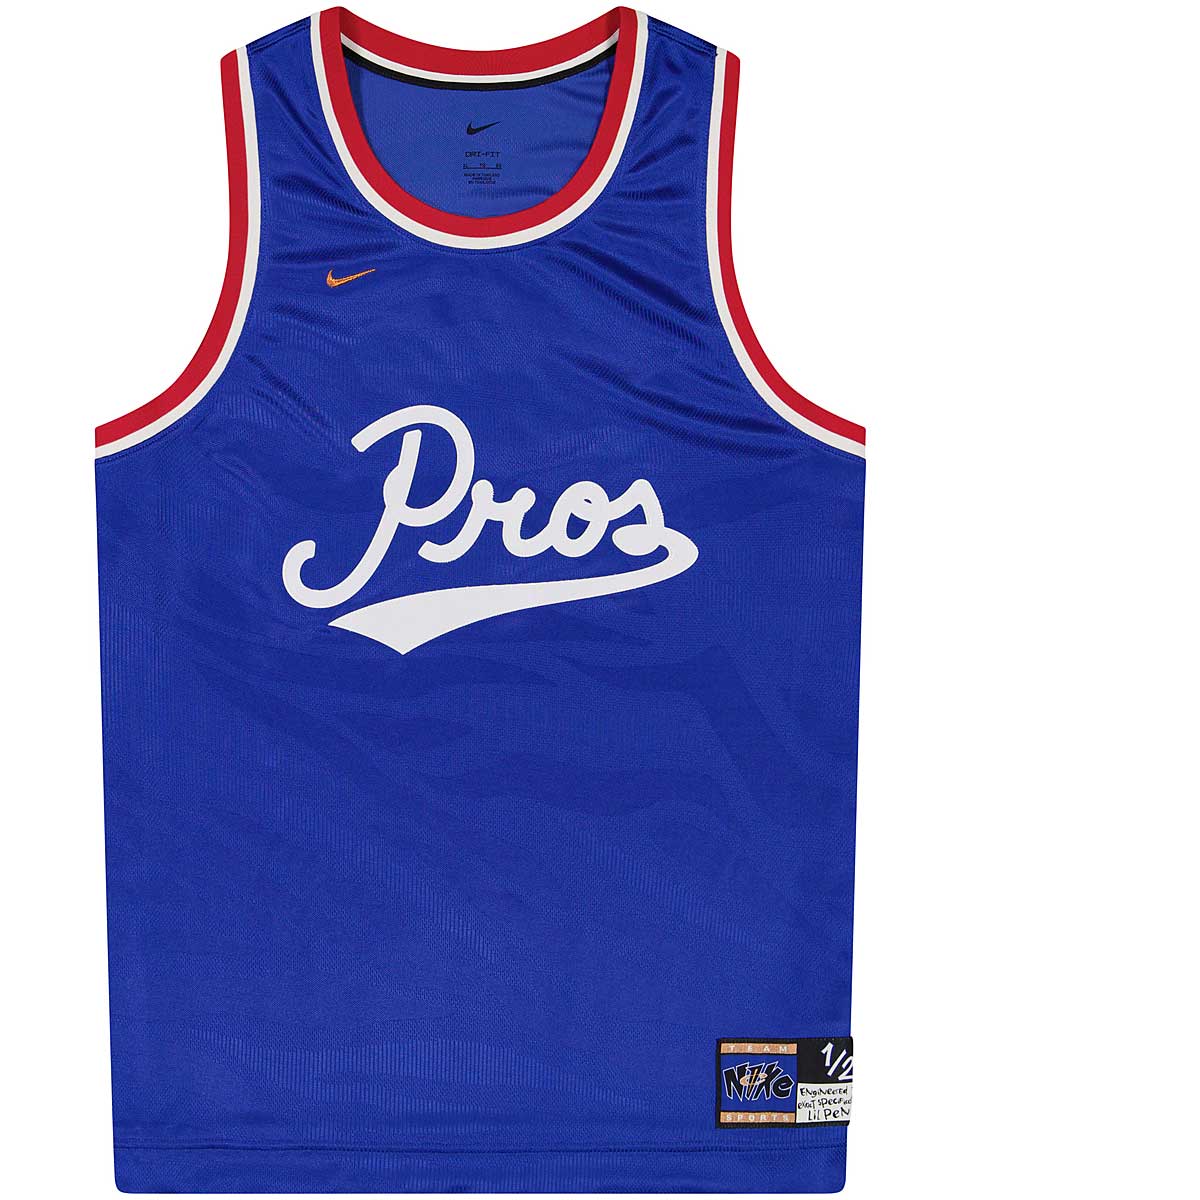 Image of Nike Lil Penny Primary Basketball Jersey, Game Royal/Metallic Copper, Male, Basketball Jerseys, DA5991-480